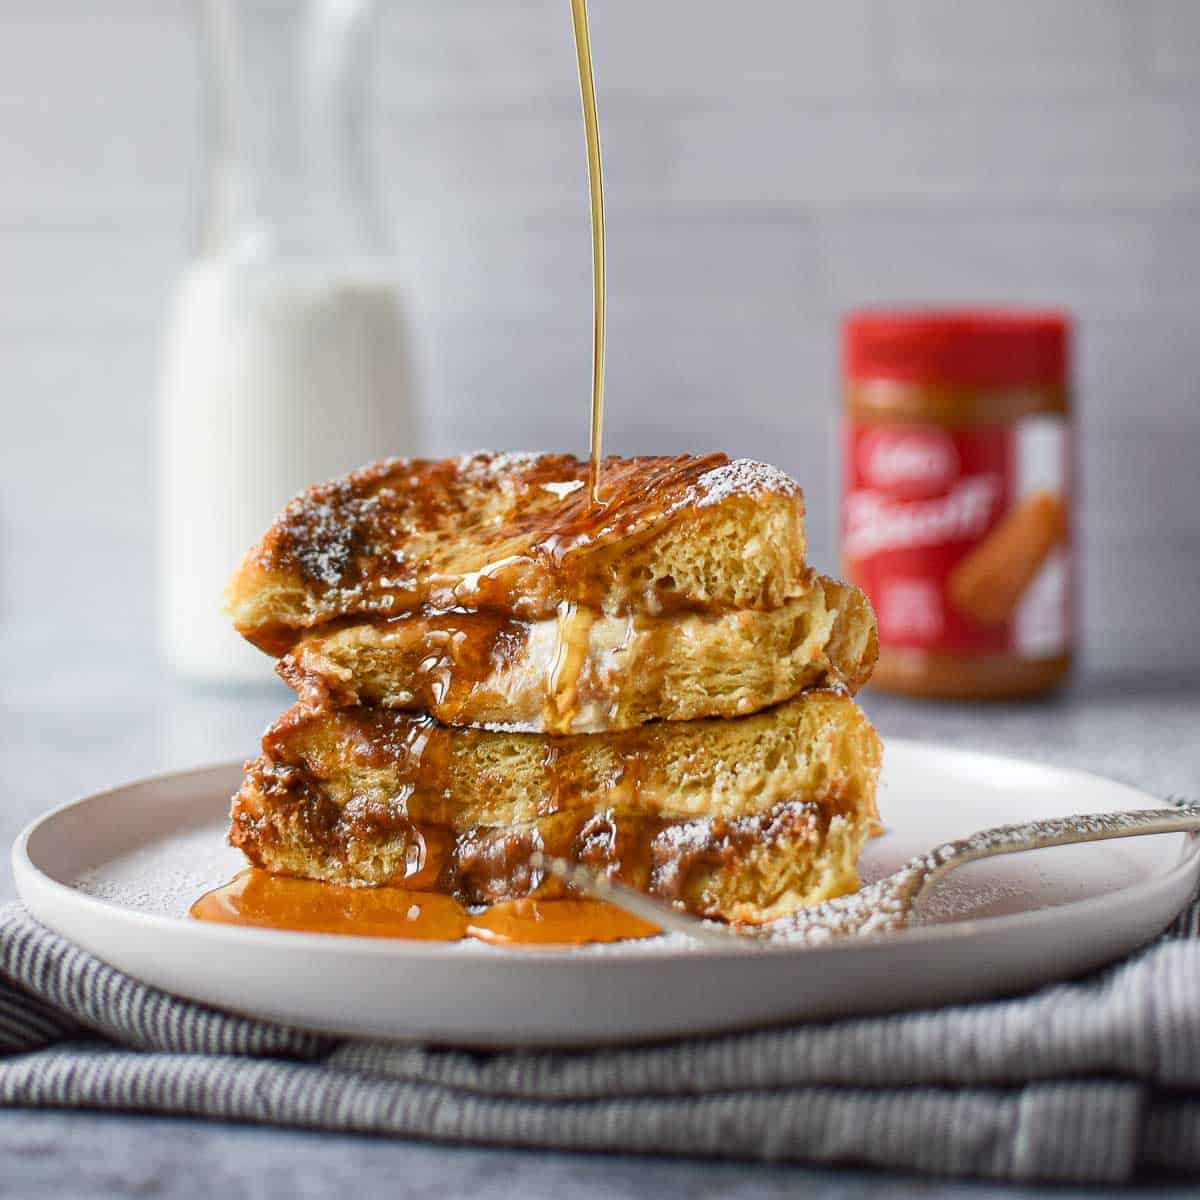 Stuffed French toast on a white plate, with maple syrup drizzled over it.